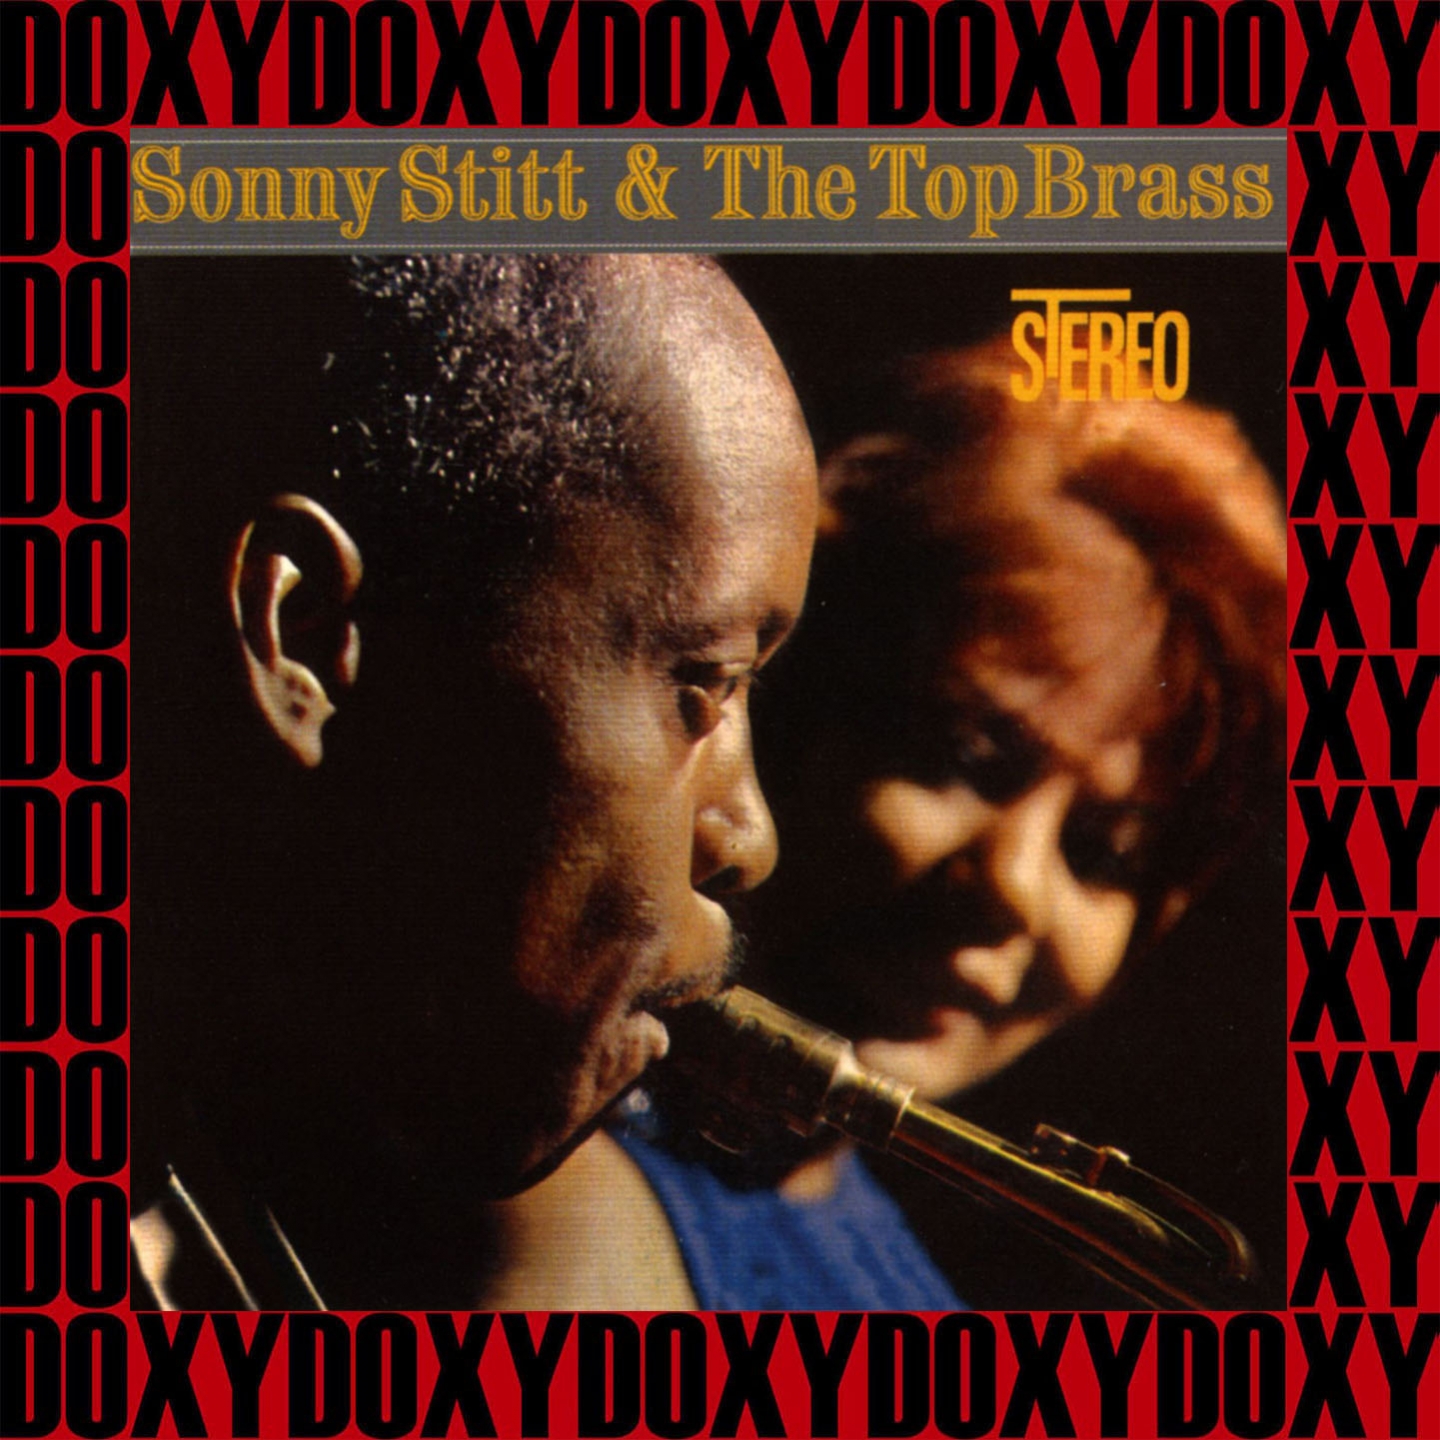 Sonny Stitt & The Top Brass (Remastered Version) (Doxy Collection)